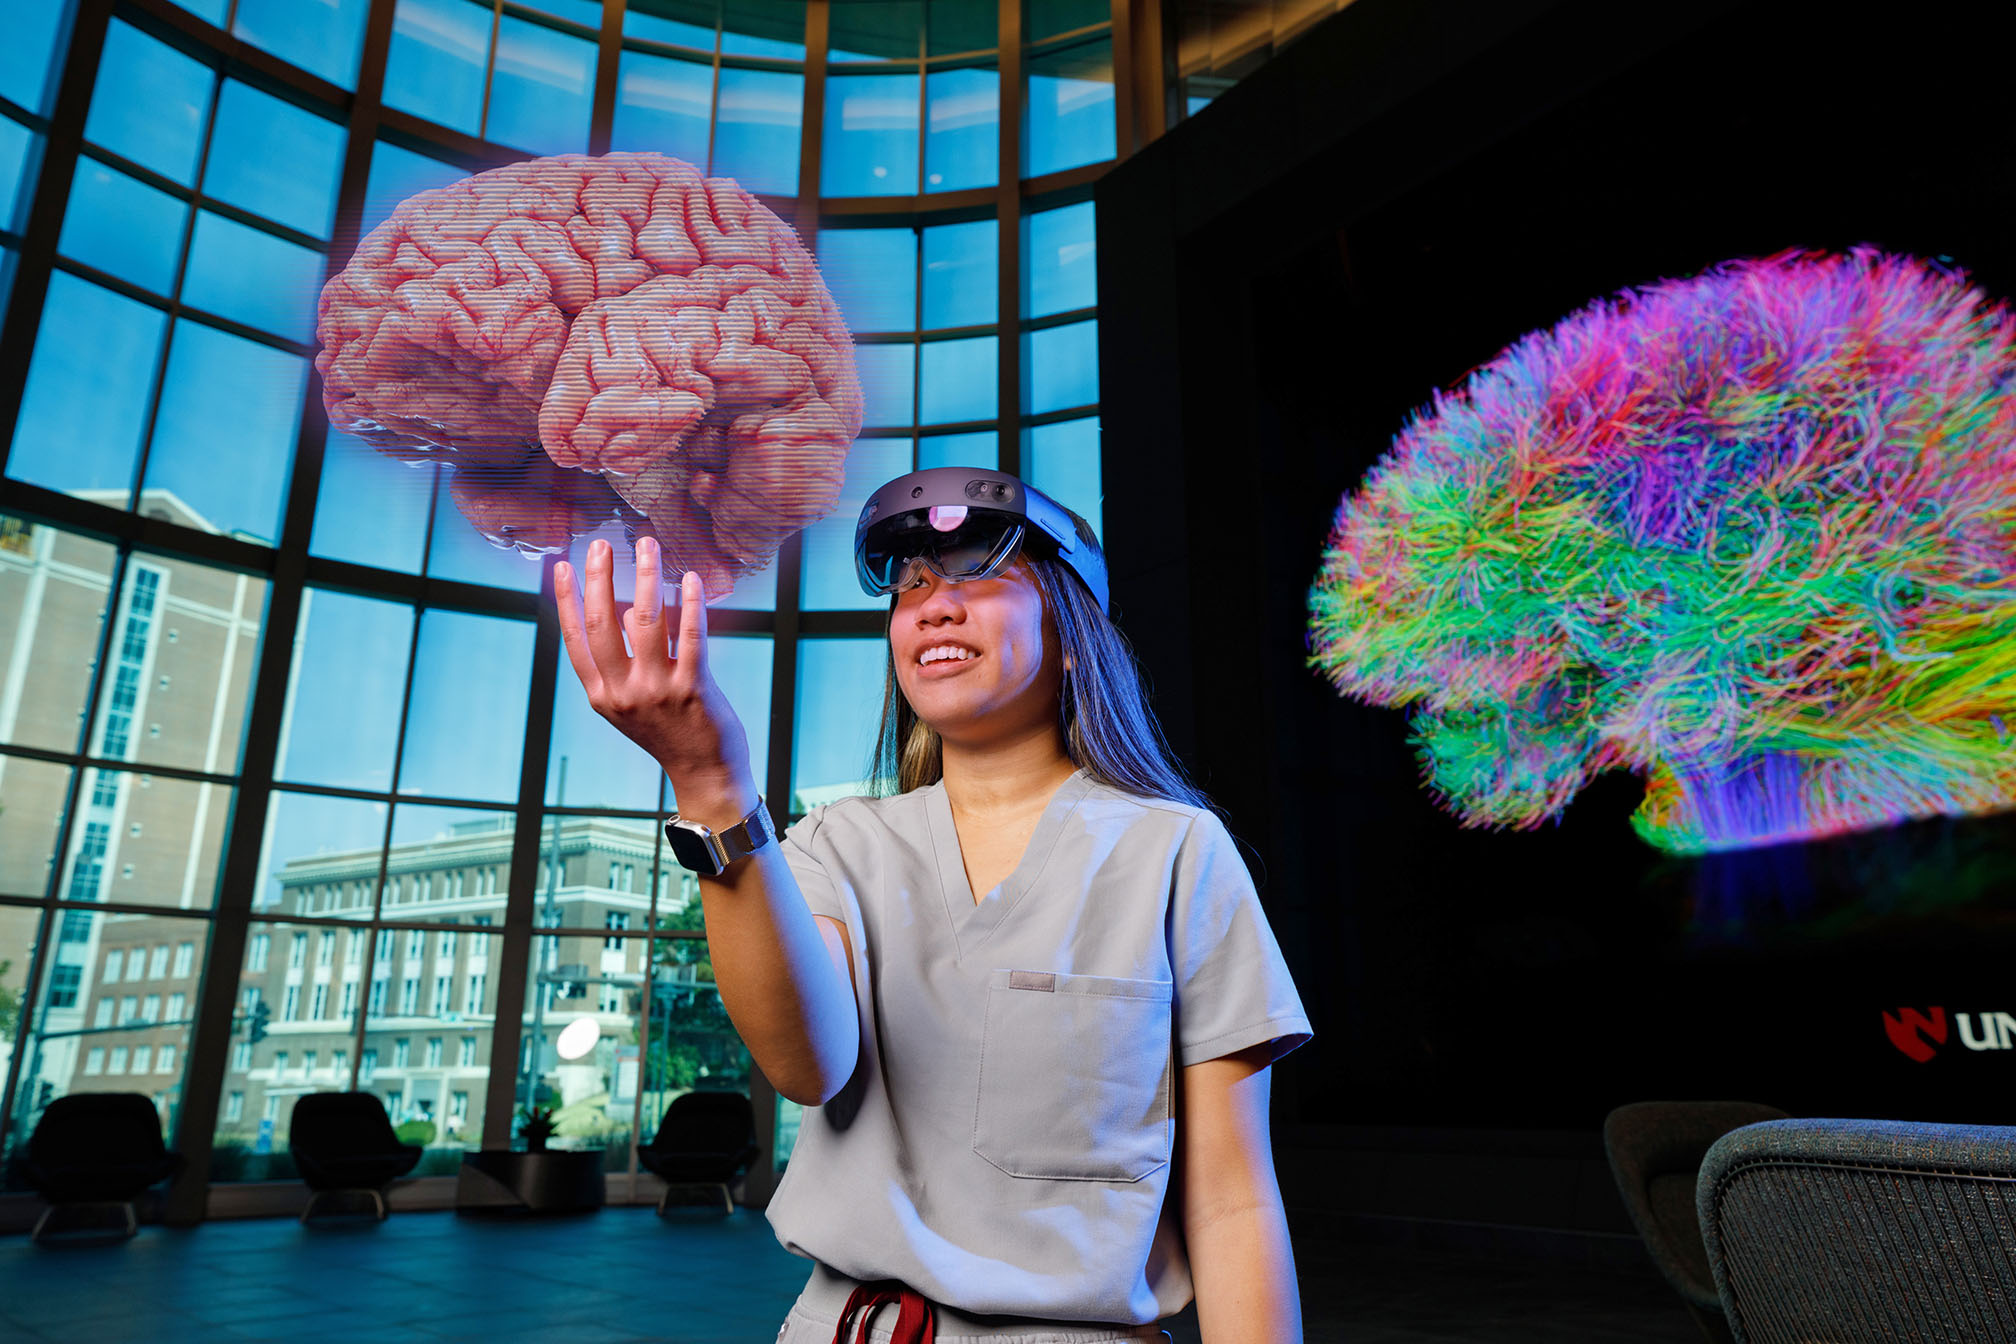 UNMC medical student Uyen Tran offers a simulated look at some of iEXCEL&apos;s health care simulation capability&comma; examining a 3D brain model based on MRI data within an Augmented Reality head mounted display&period;